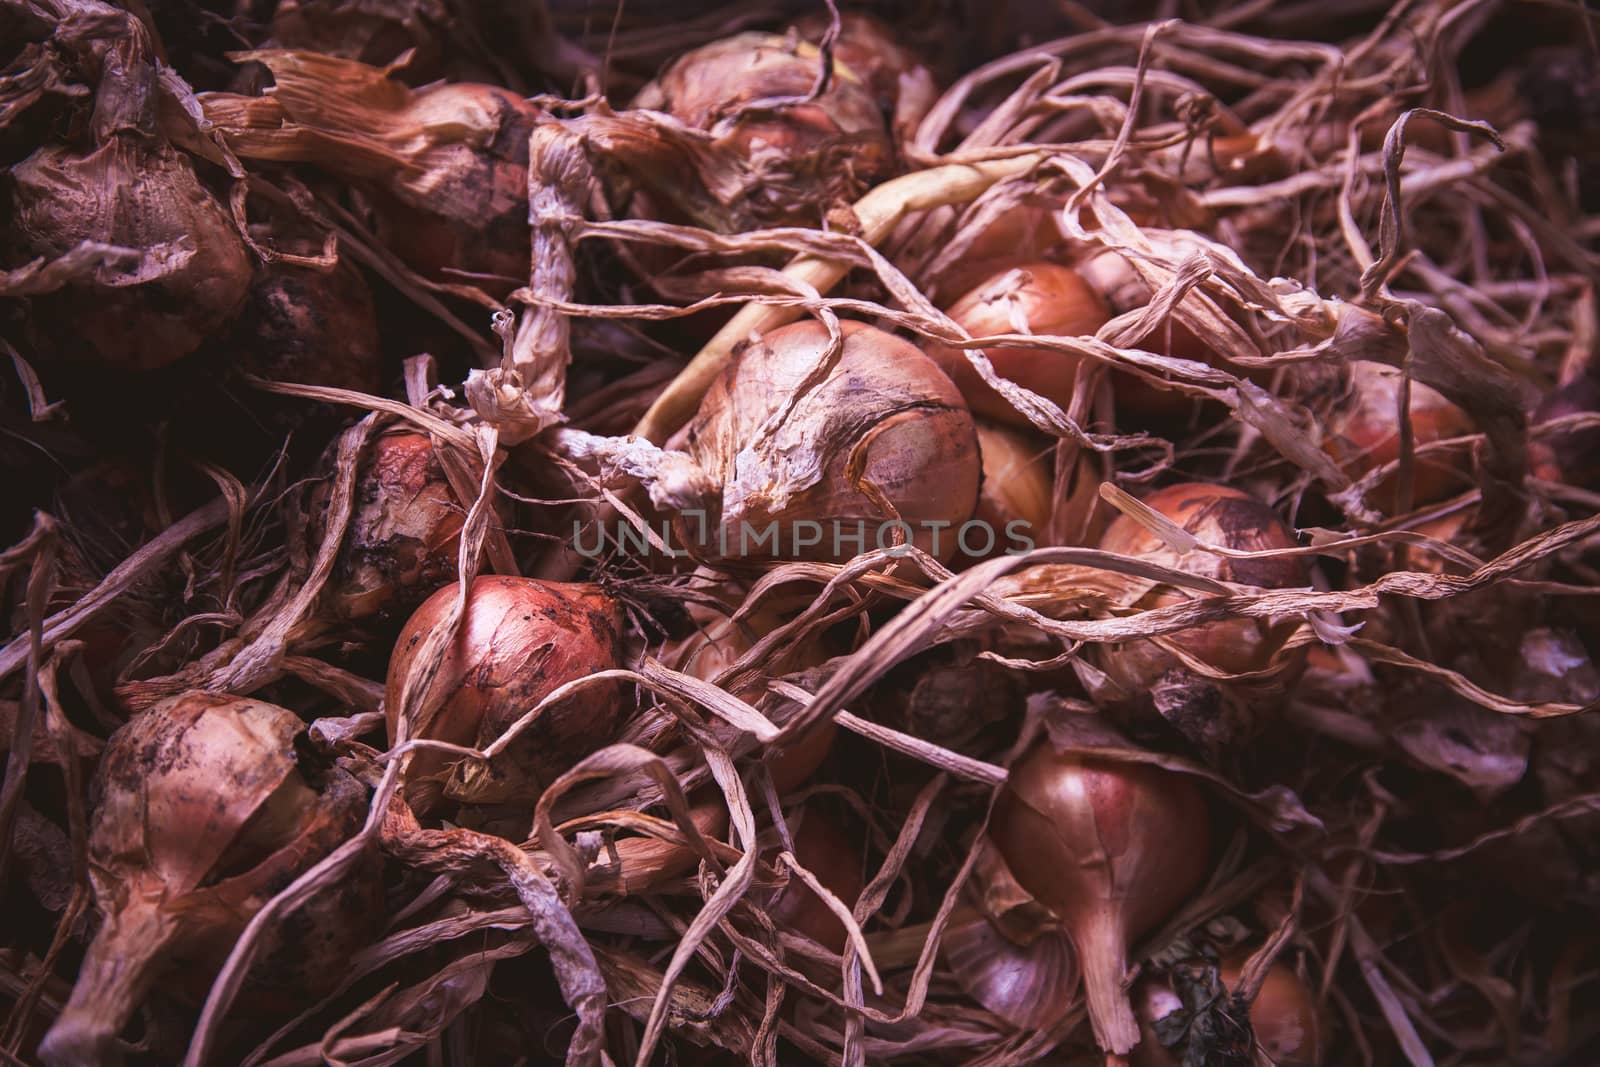 Onion (Allium) crop, harvested and drying